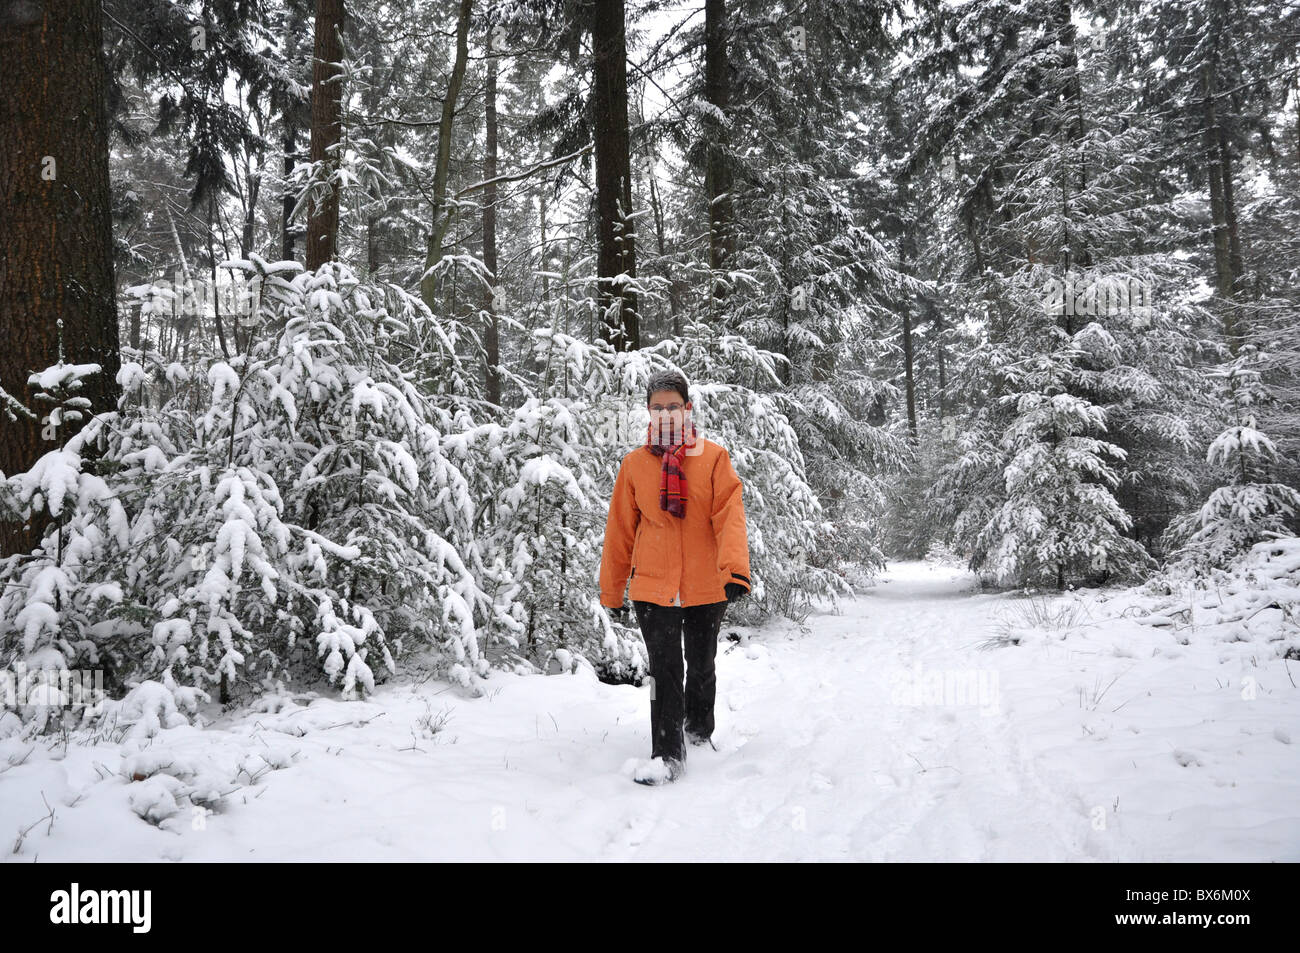 Senior woman walking in snowy forest Stock Photo